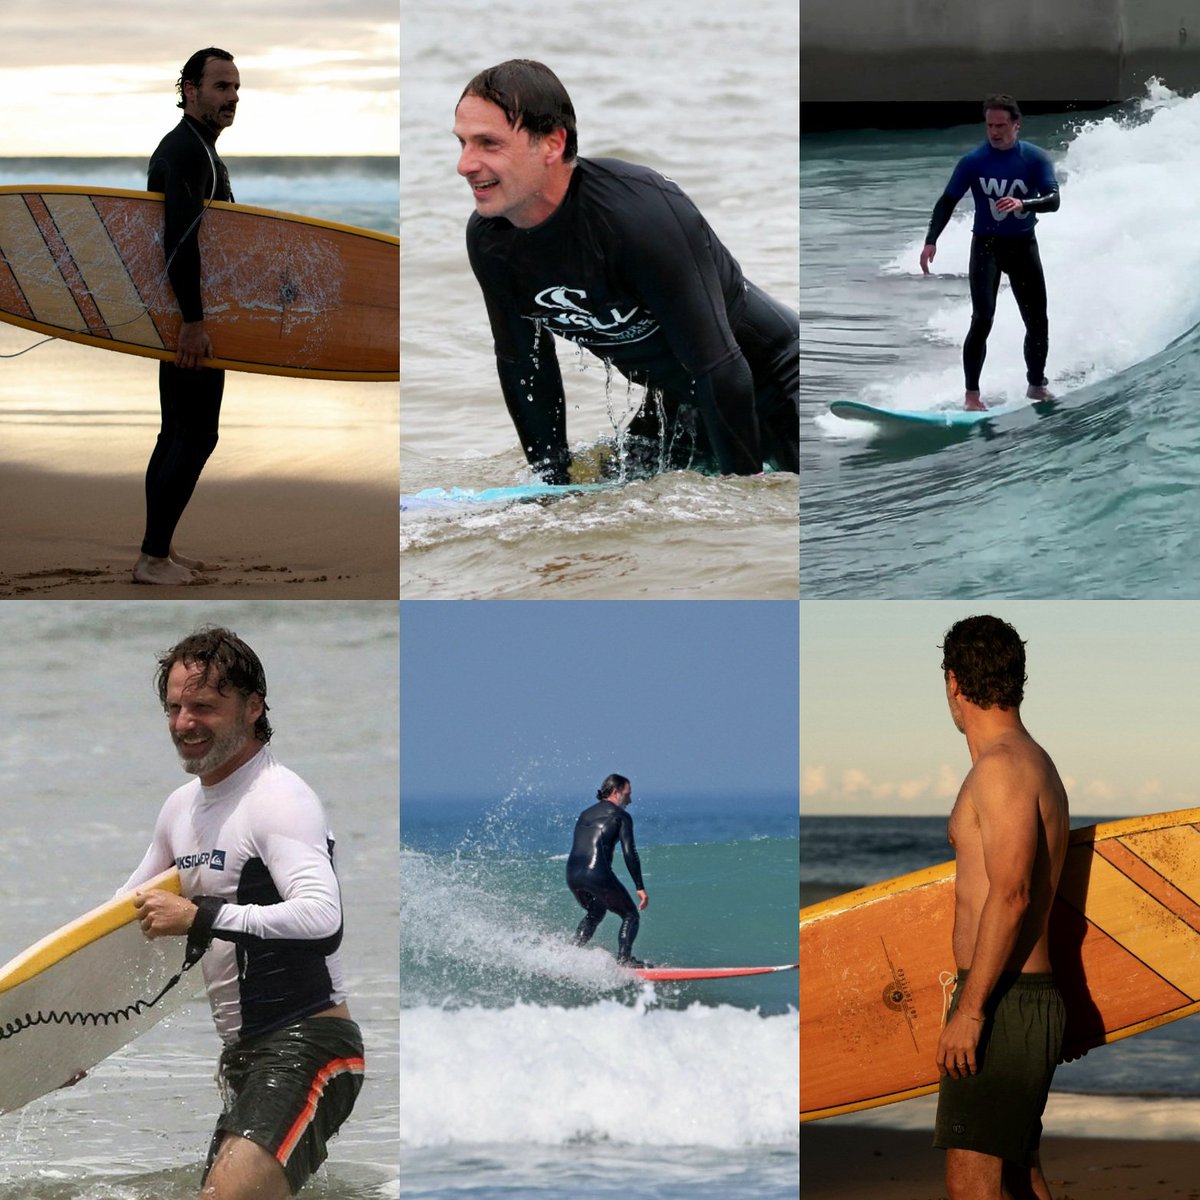 andrew lincoln and his hobby of surfing! is there anything this man can’t do? 🏄🏻‍♂️